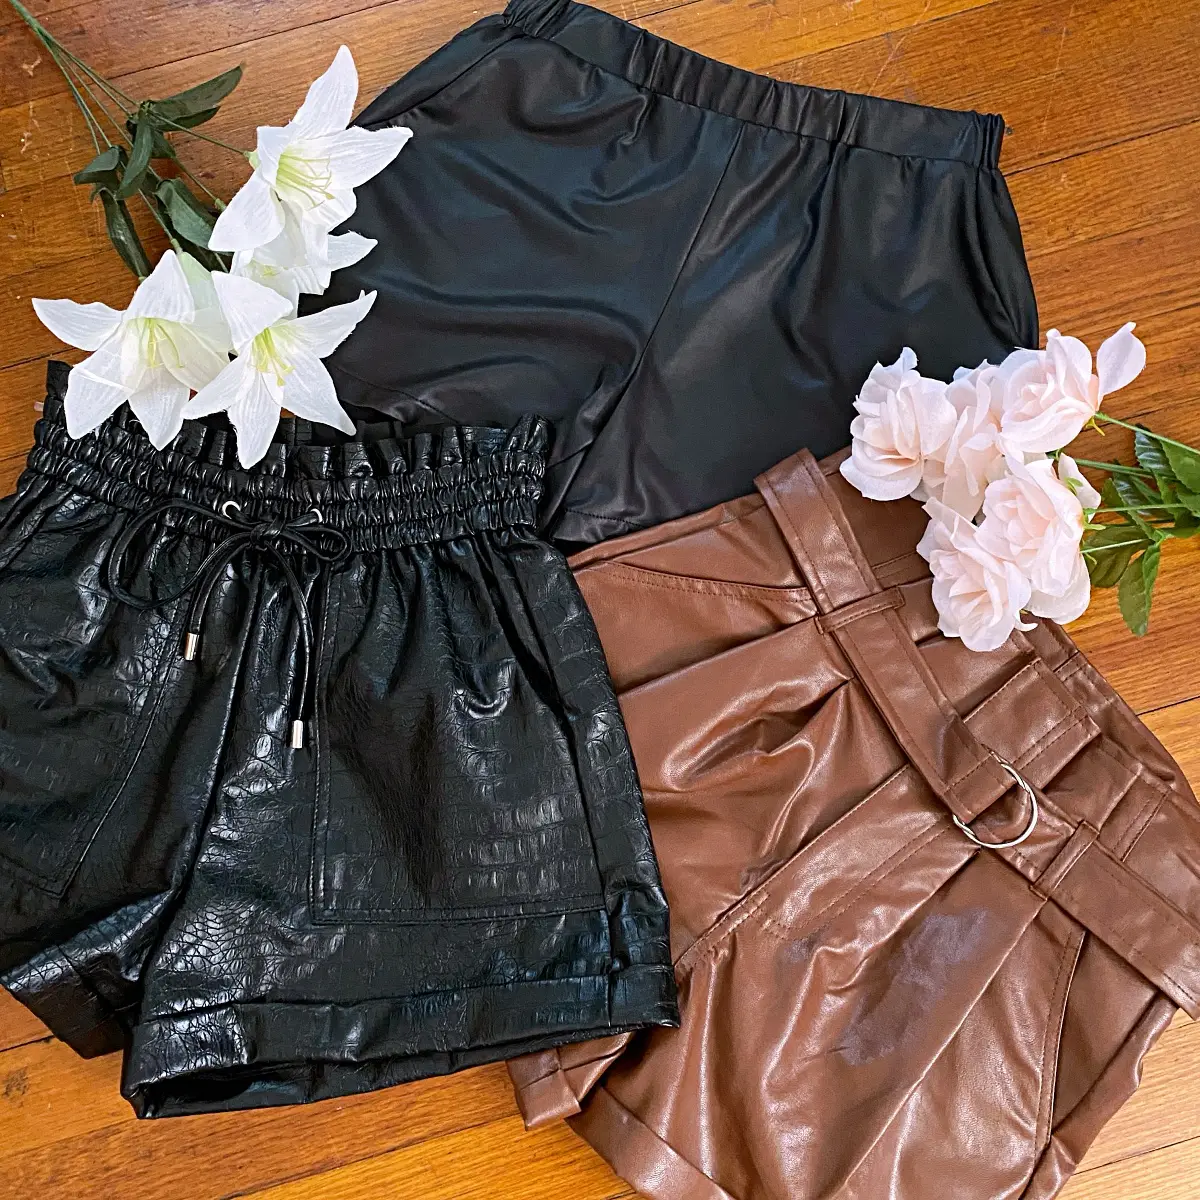 leather shorts outfits